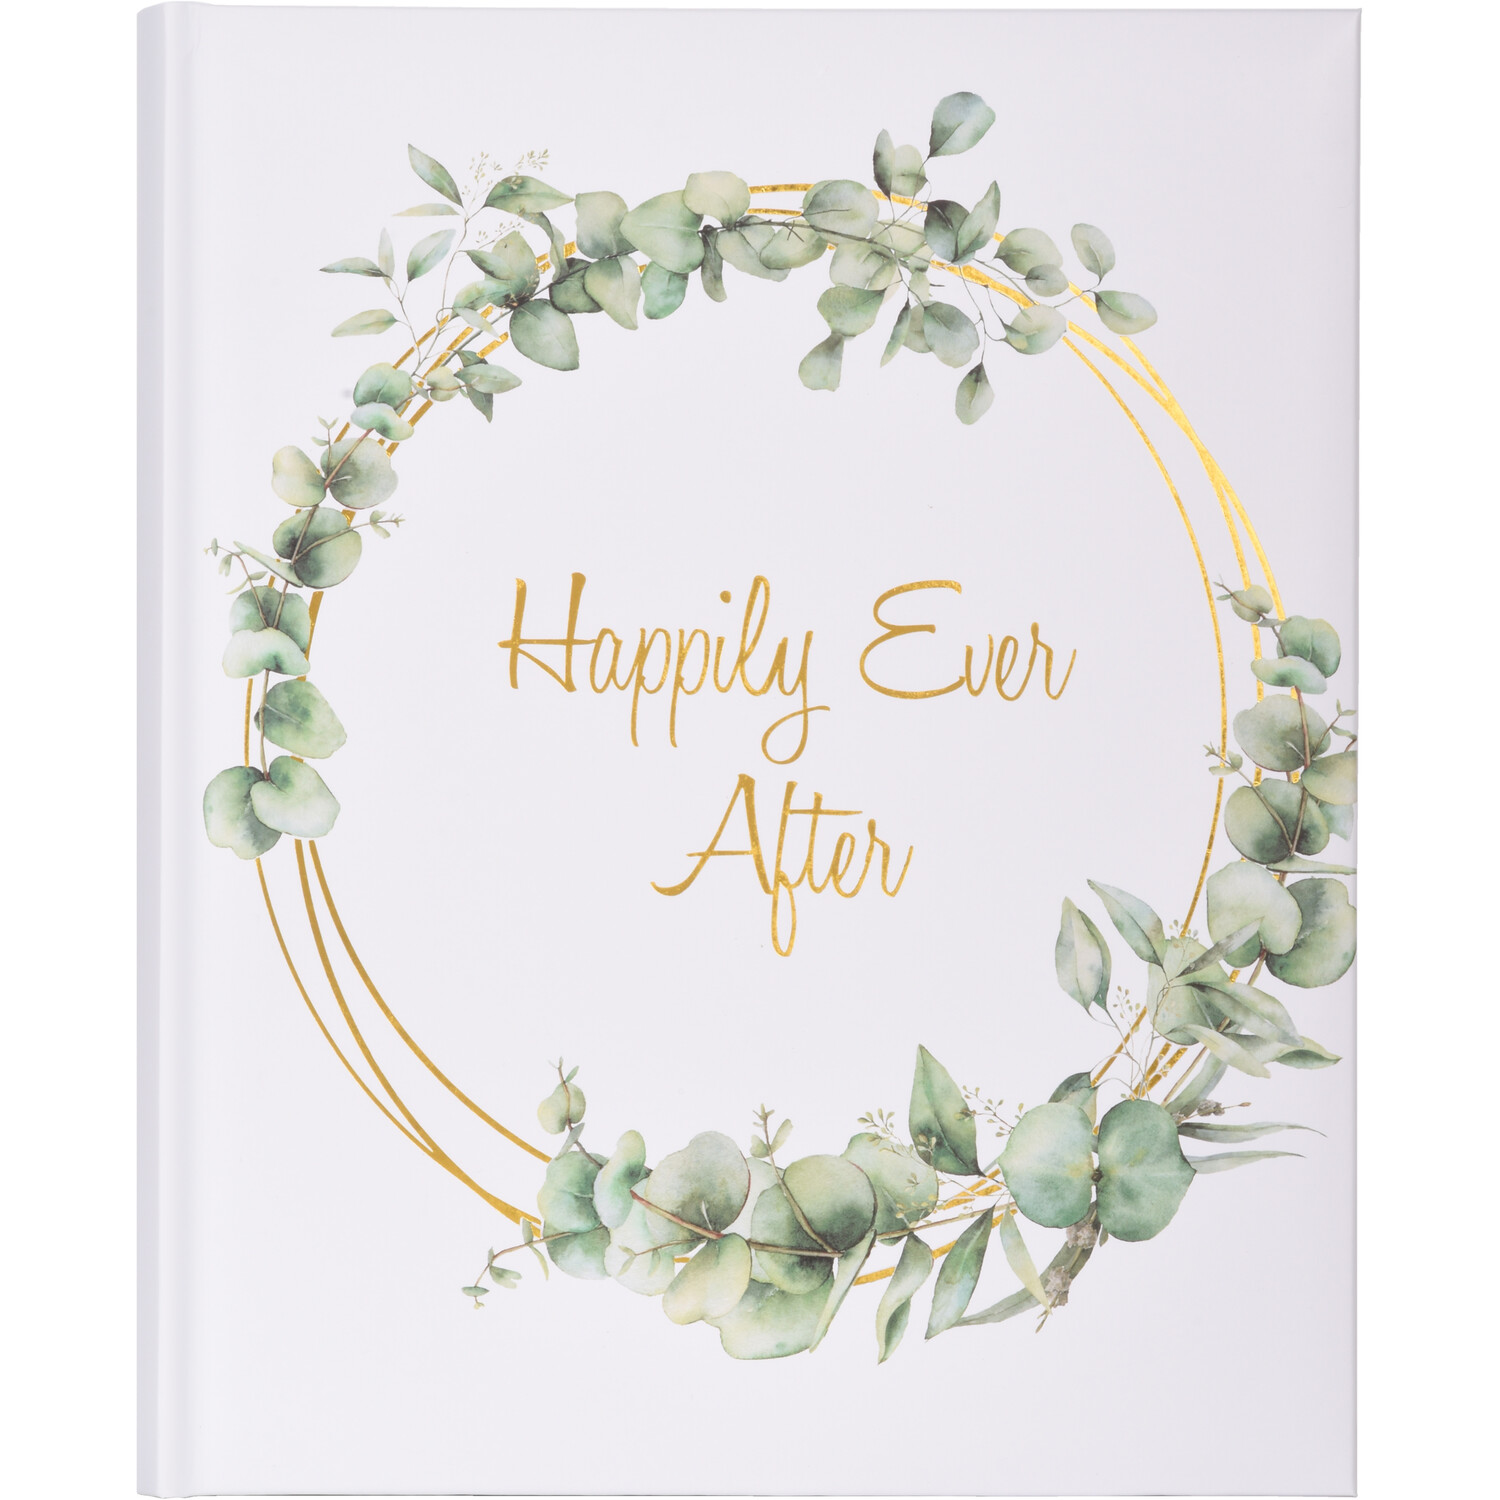 Happily Ever After Self-Adhesive Album - White Image 1